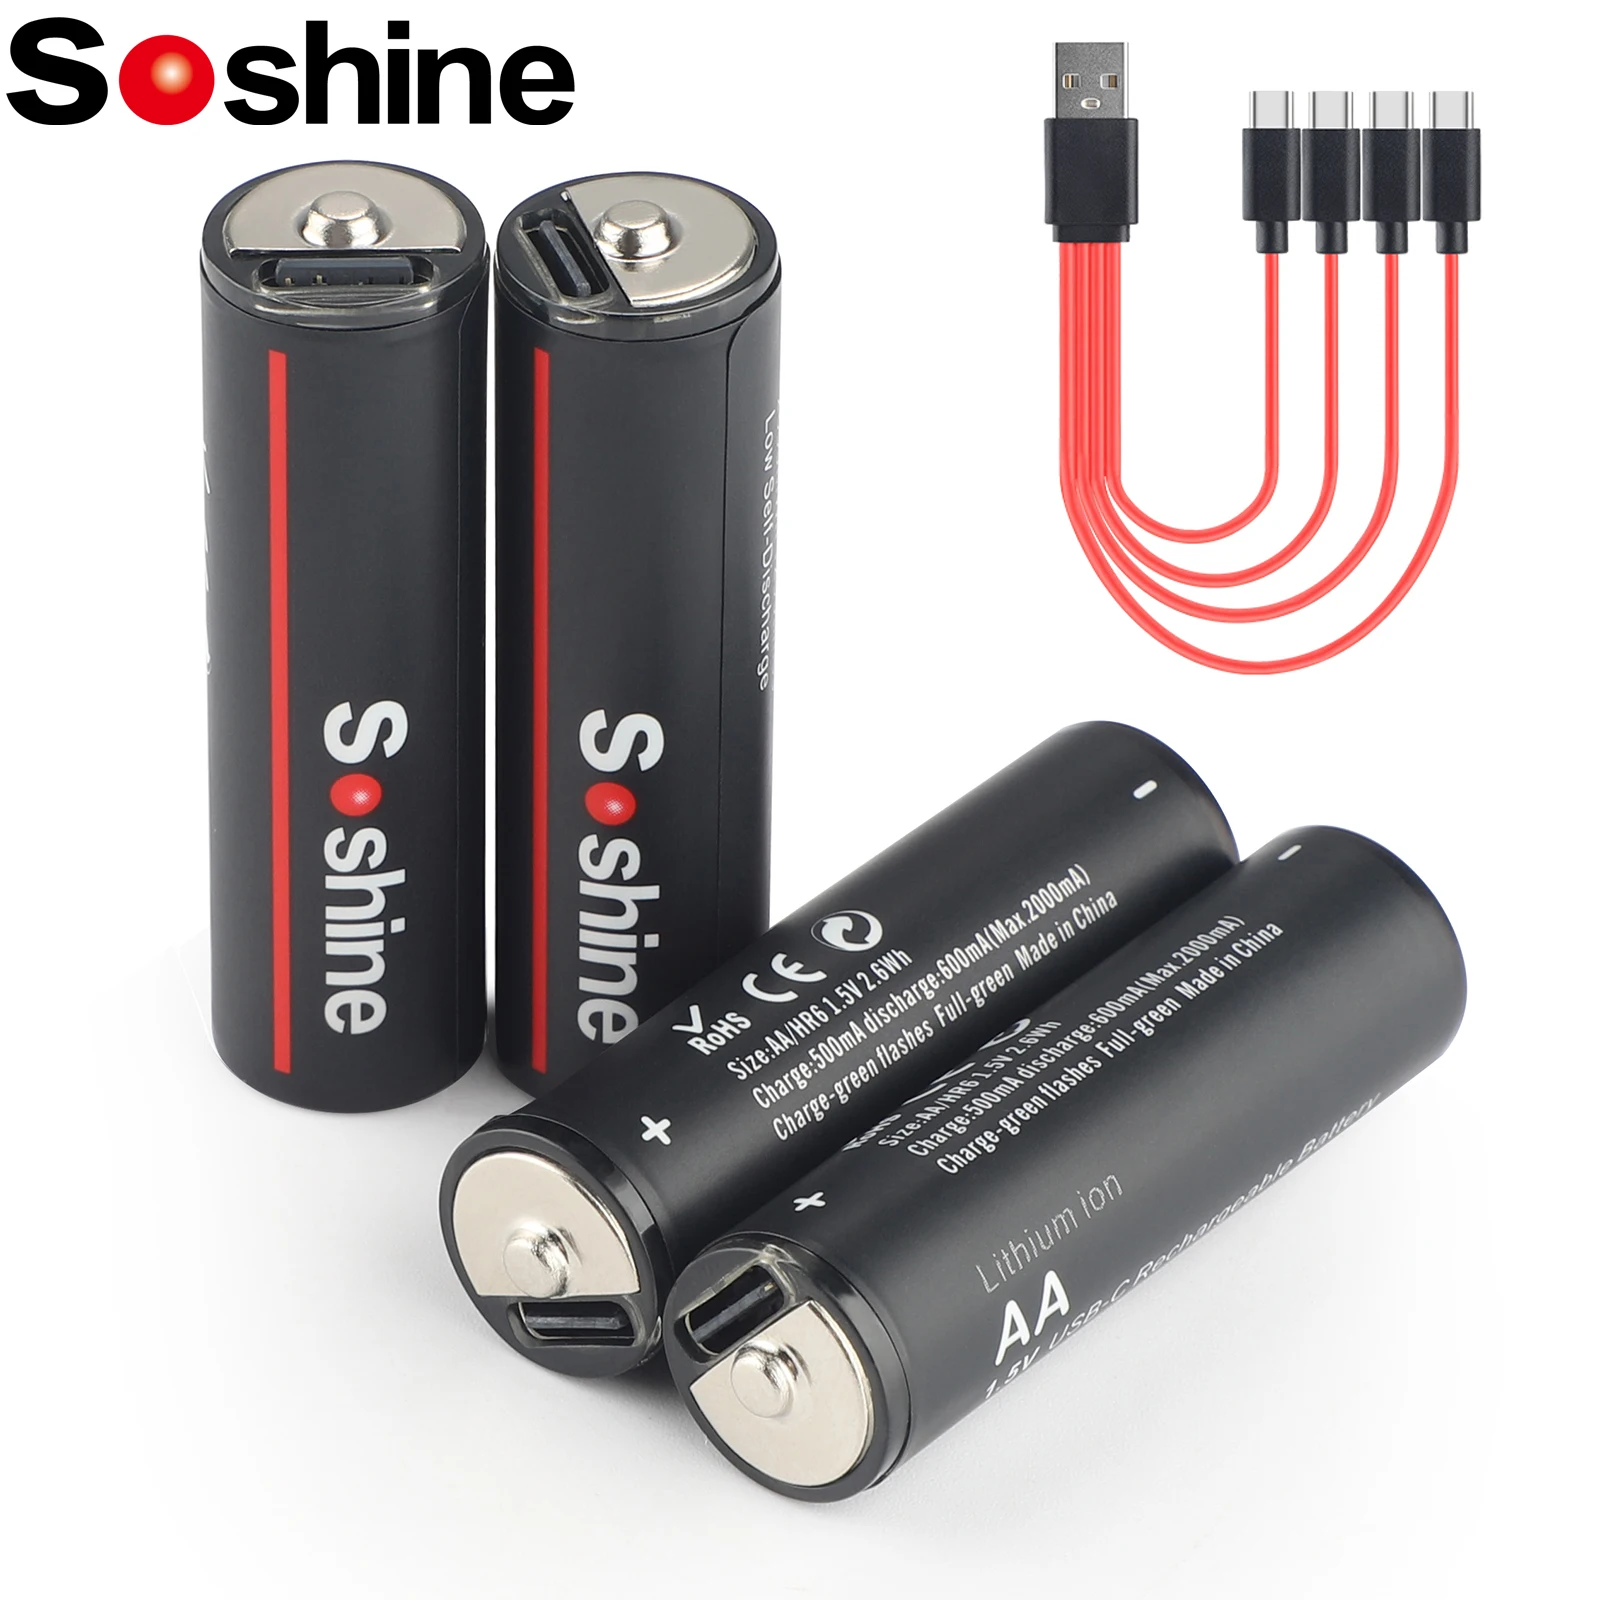 Soshine USB AA 2600mWh Lithium Batteries 1.5V 2600mWh Li-Ion Rechargeable Battery with 4-in-1 USB Cable for Remote Control Mouse